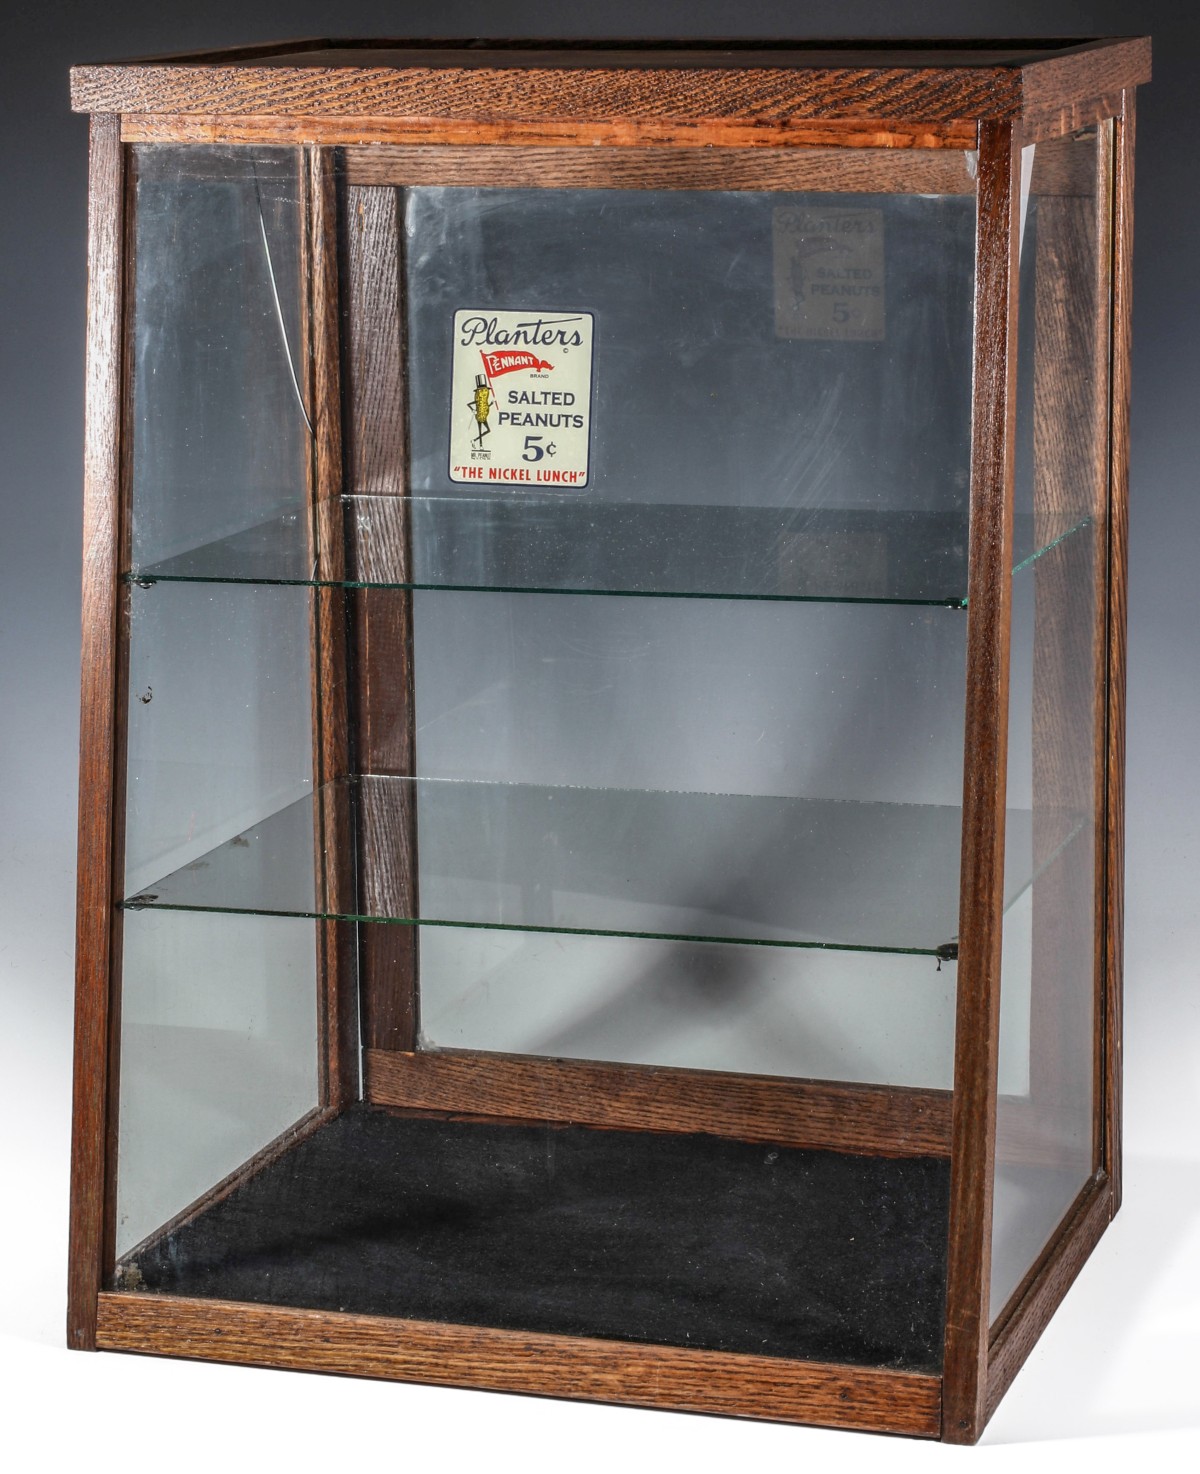 AN EARLY 20TH CENTURY SHOWCASE WITH PLANTER'S DECAL